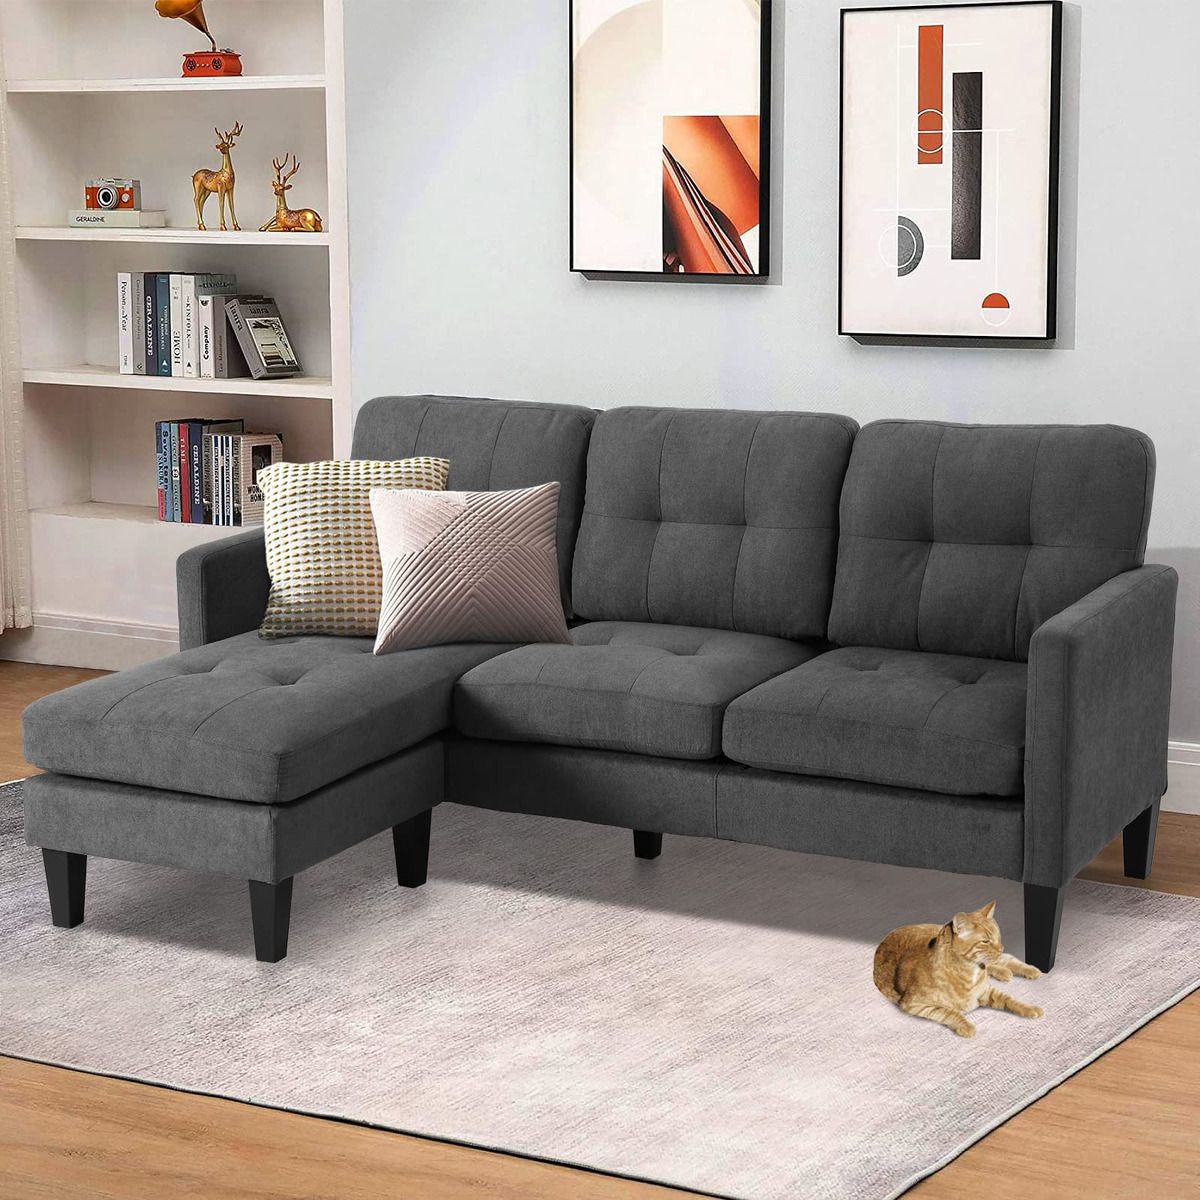 Jovno Convertible Sectional Sofa Couch, Modern L Shaped Couch 3 Seat Sofa |  Ebay With Convertible Sectional Sofa Couches (View 4 of 15)